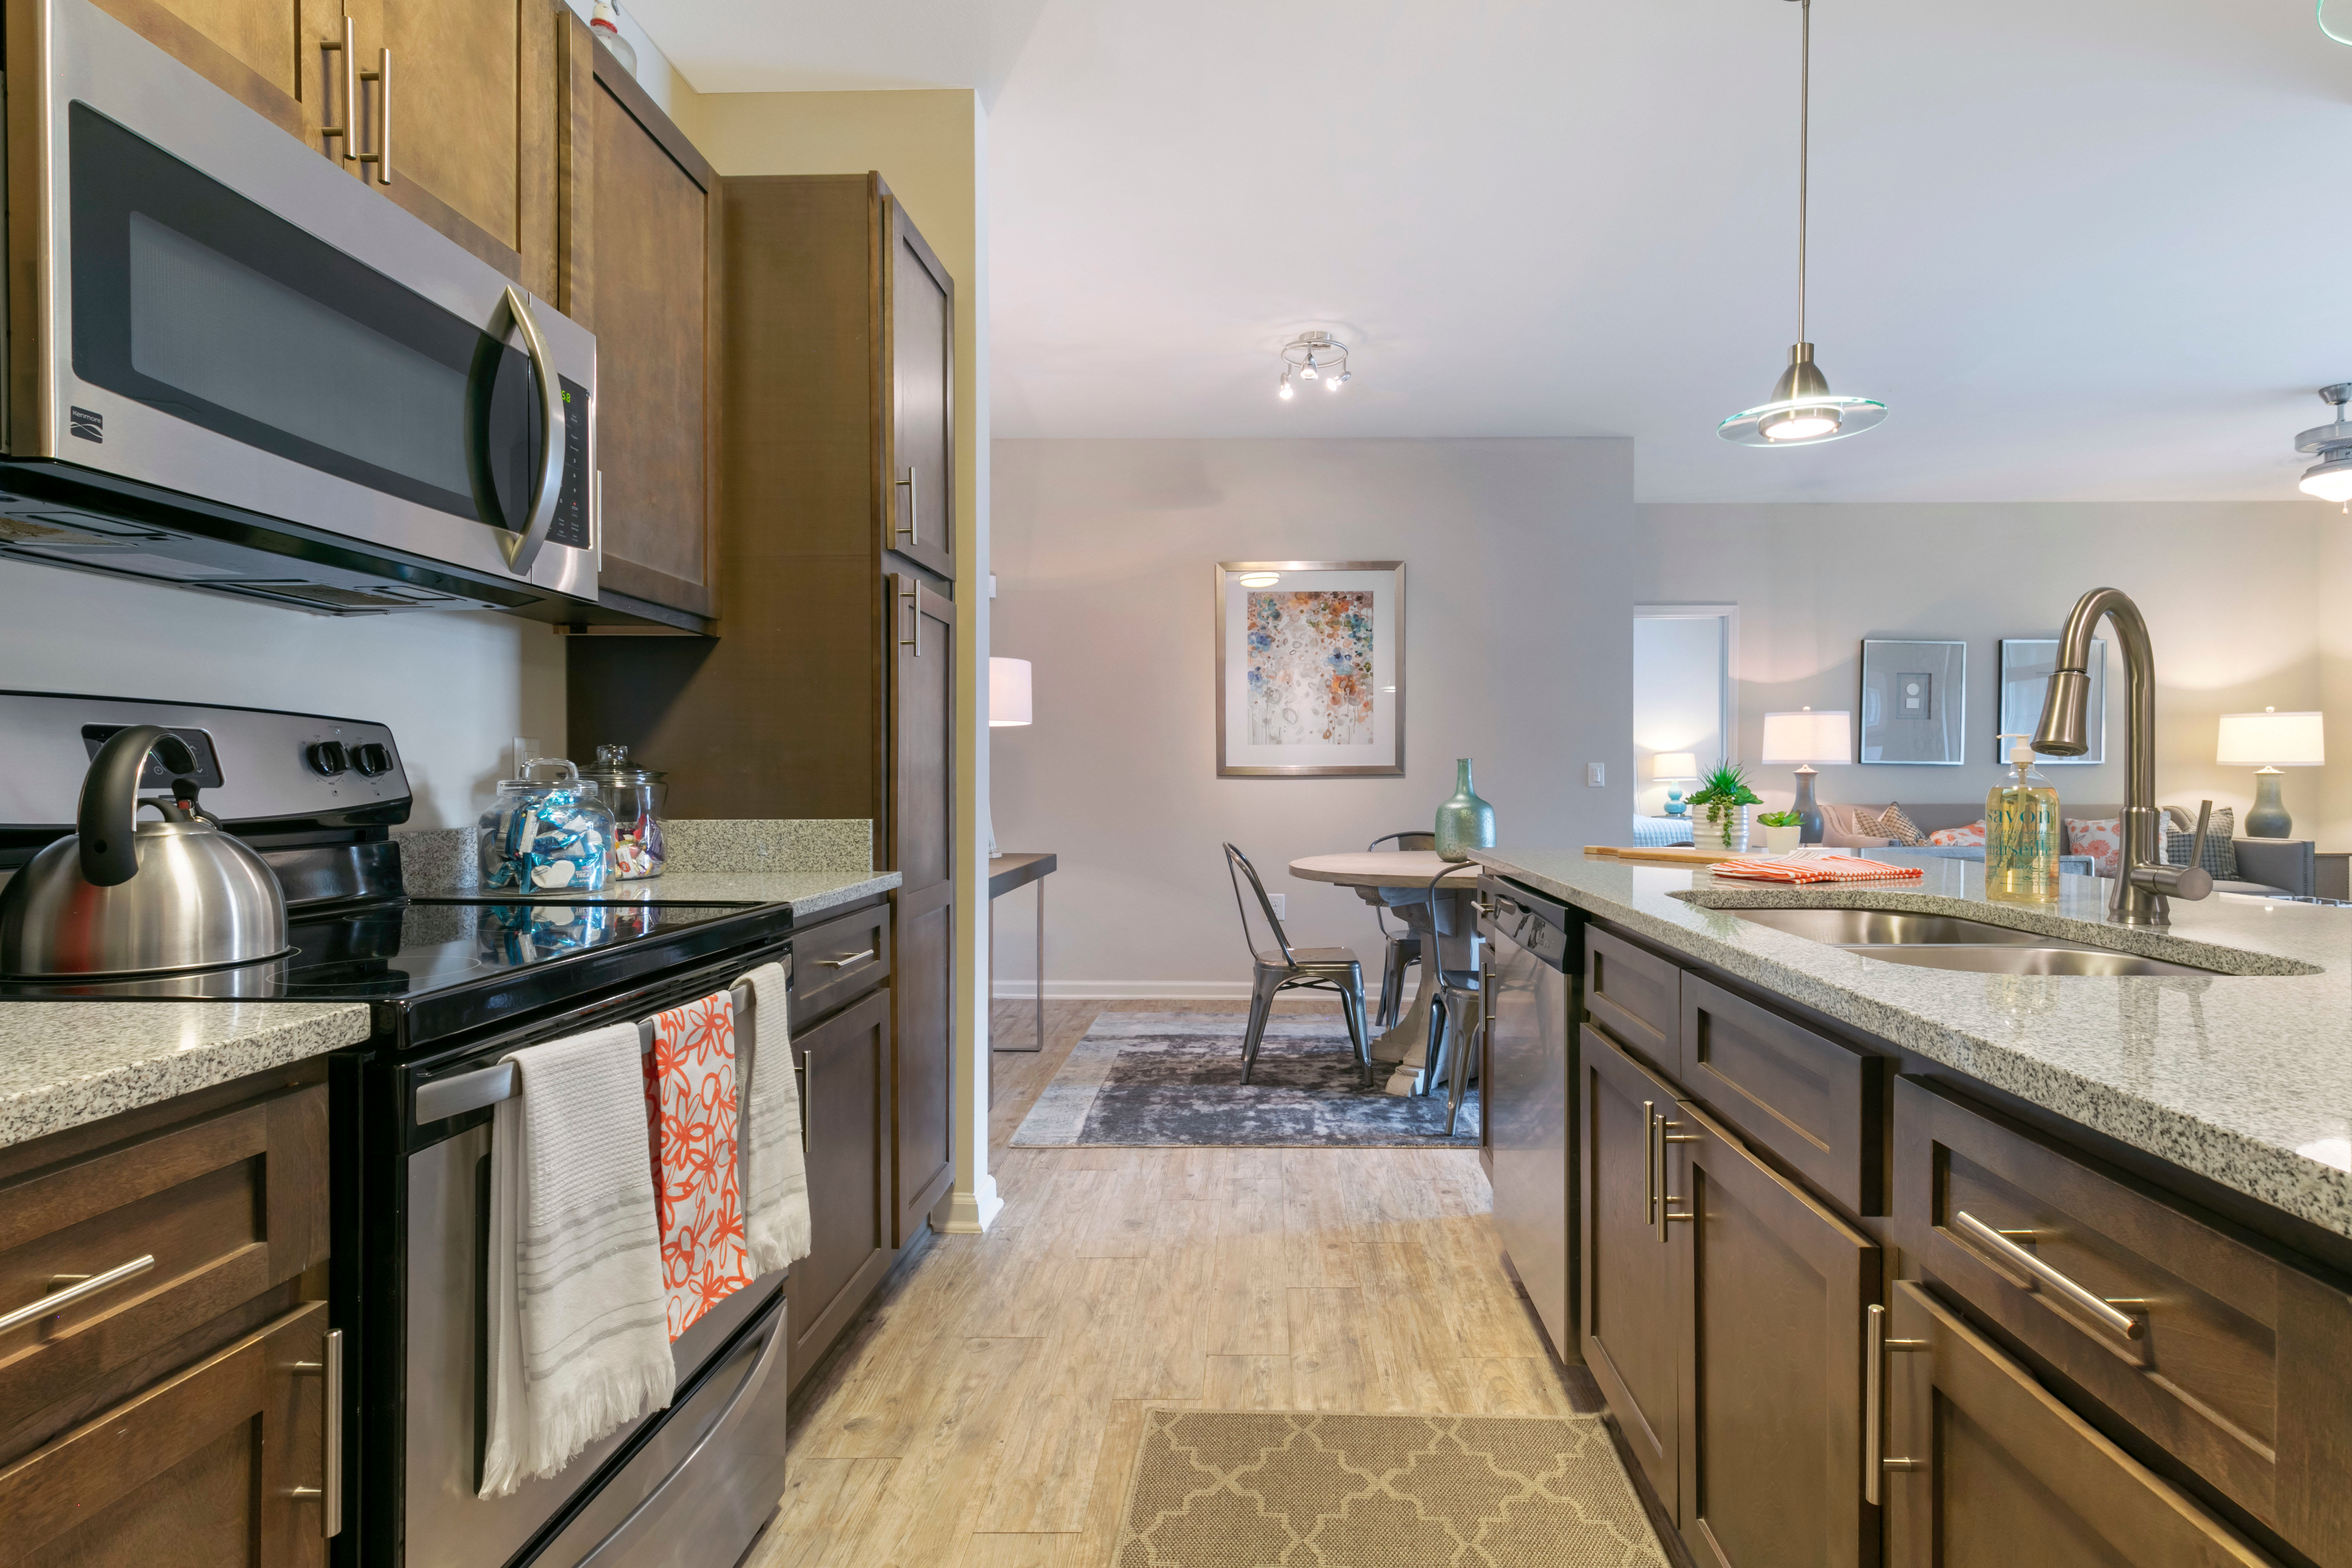 Modern kitchen with stainless steel appliances and granite countertops at The Village at Apison Pike in Ooltewah, Tennessee